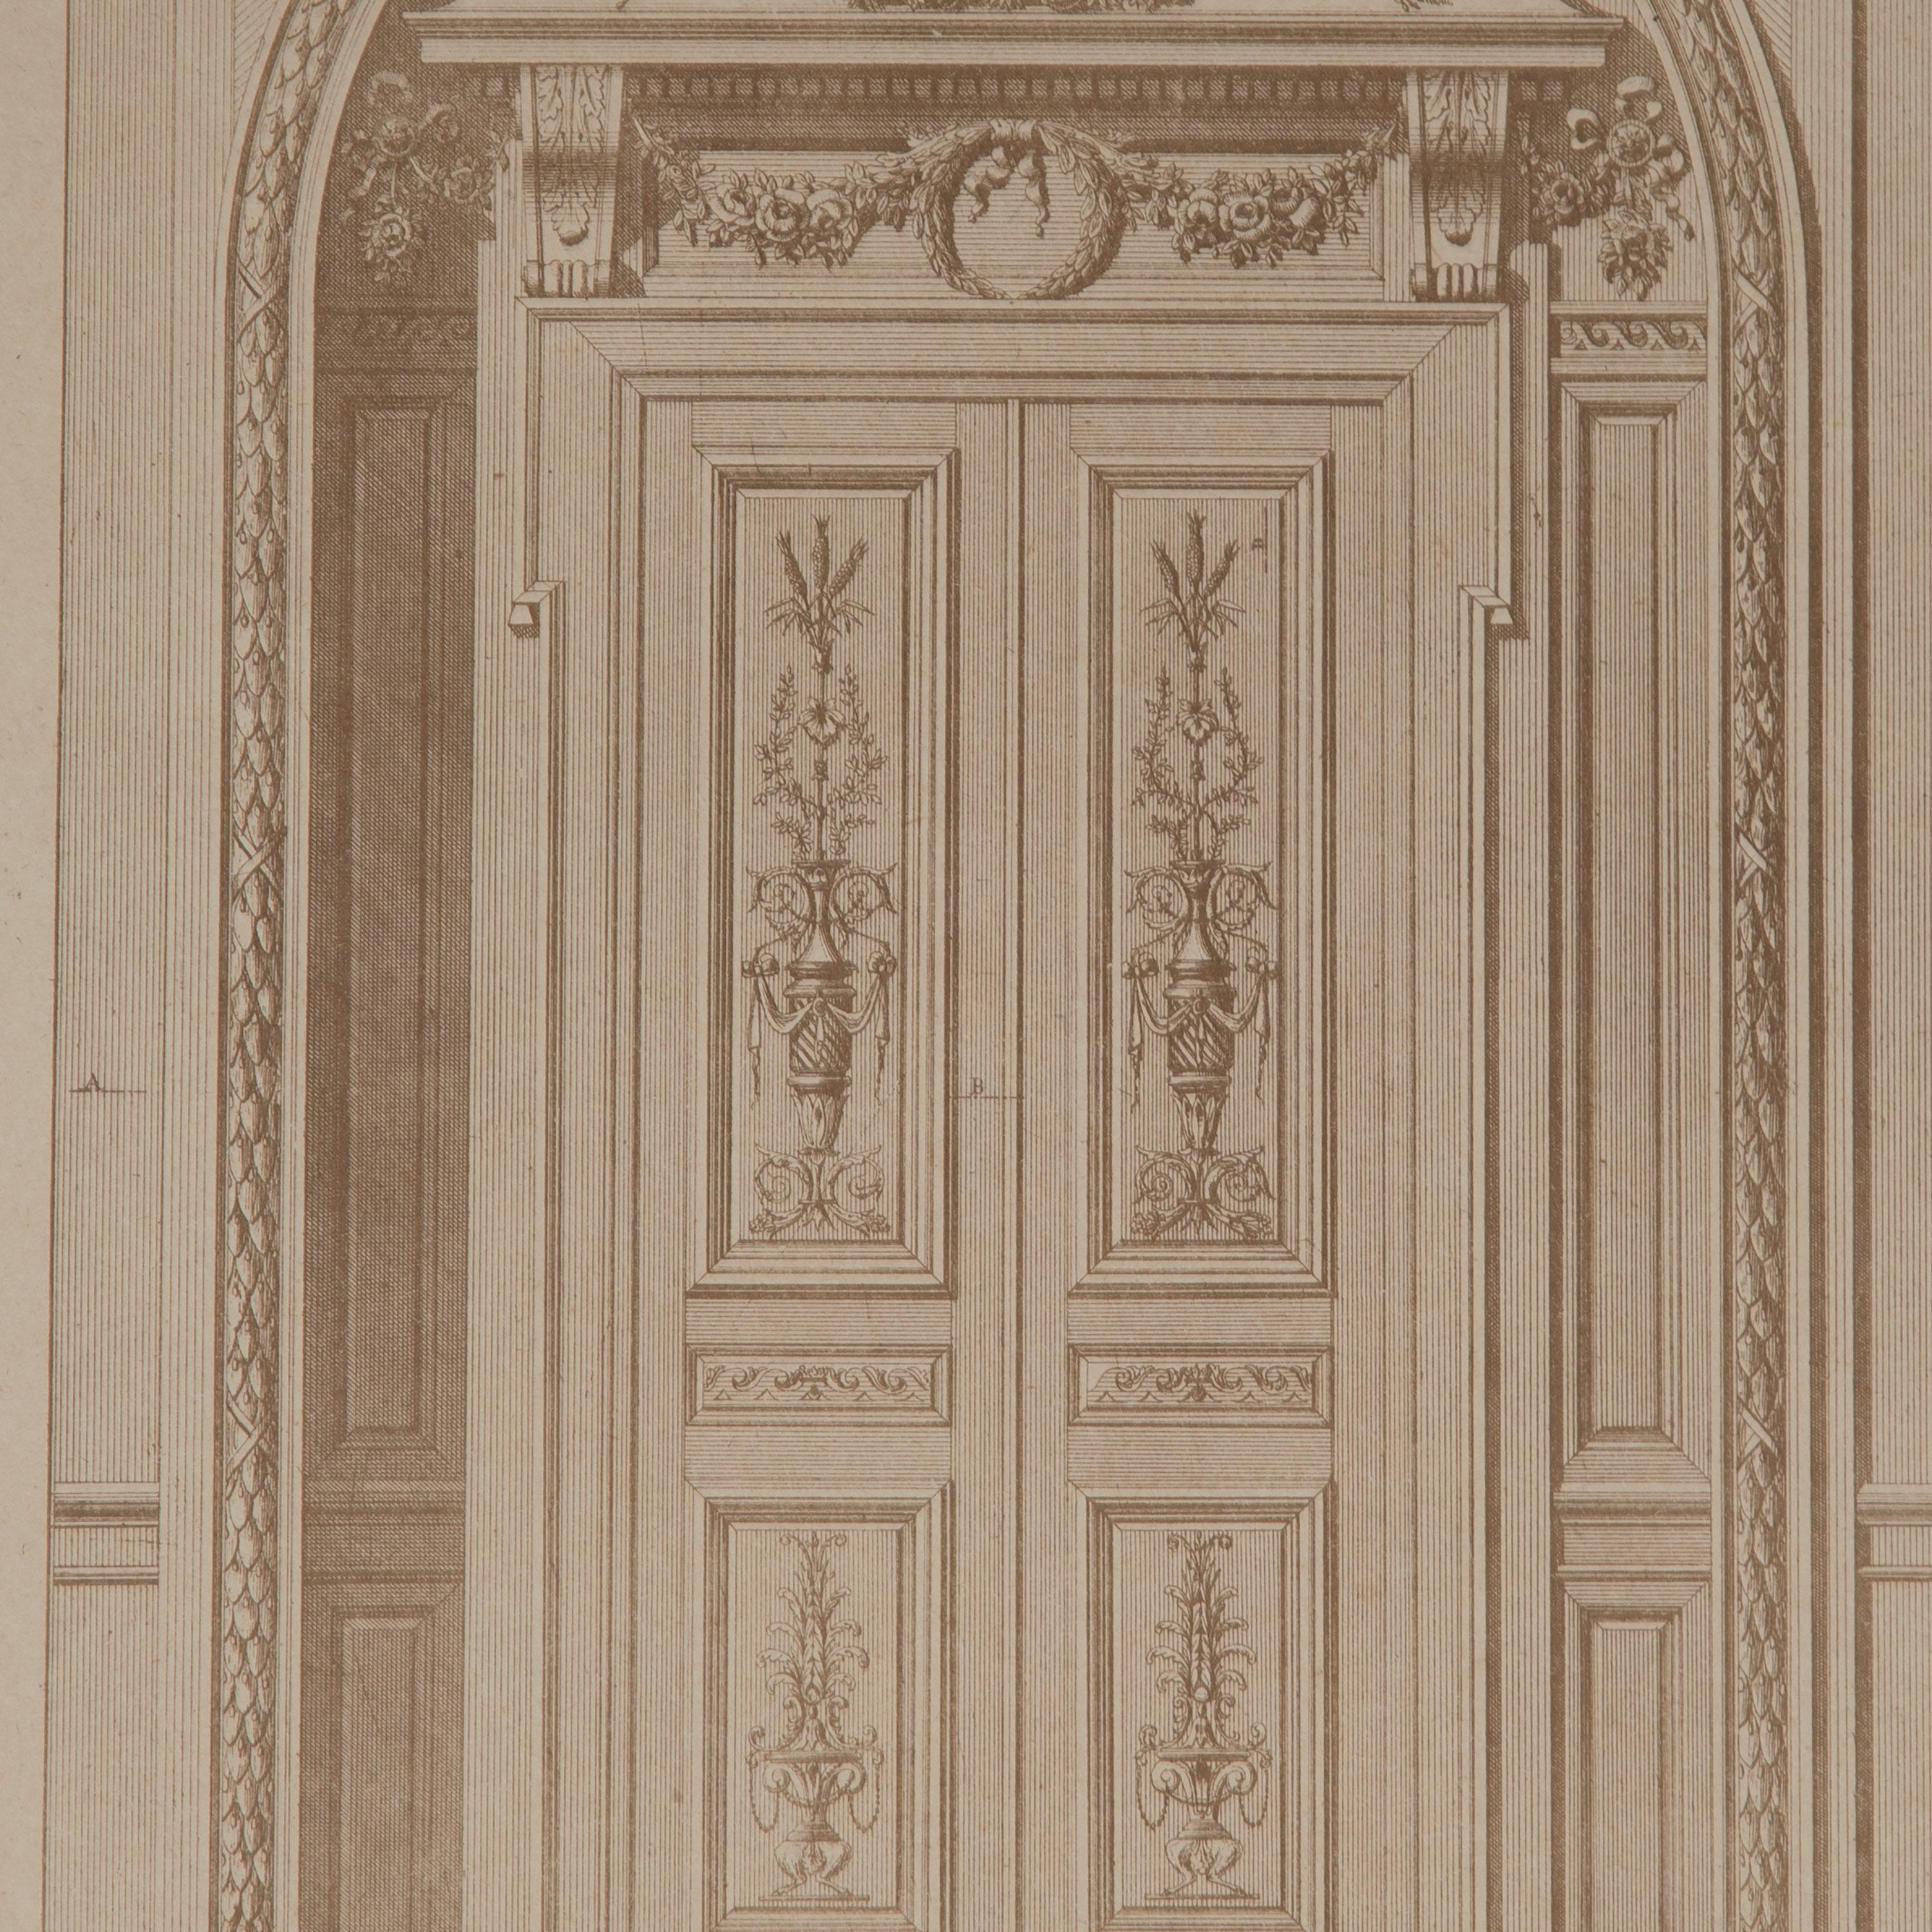 French Provincial Six French 19th Century Architectural Engravings